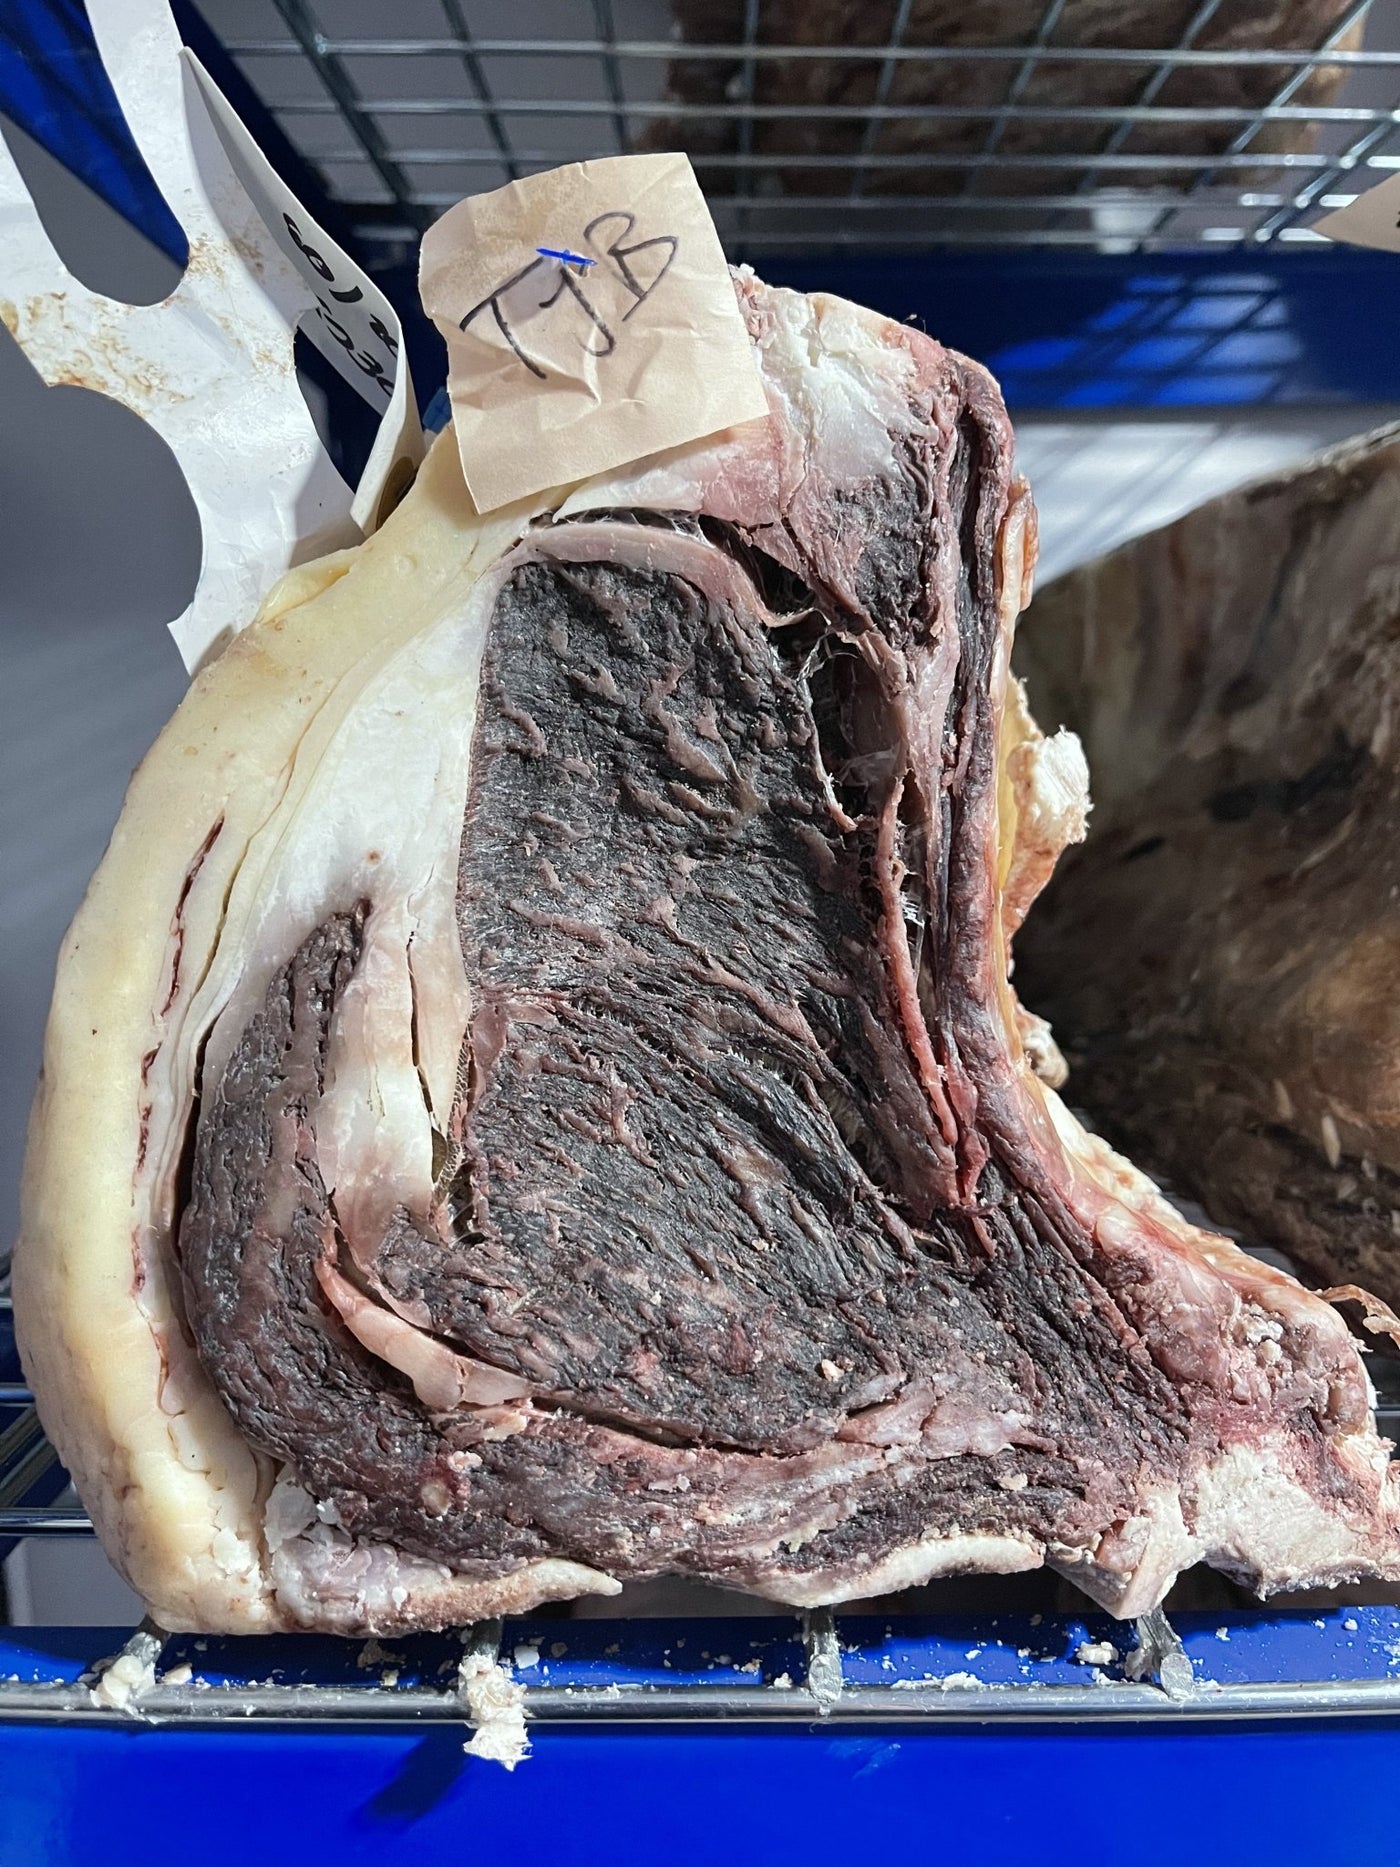 75 Day Dry-Aged Limousin Cross Sirloin On The Bone - Thomas Joseph Butchery - Ethical Dry-Aged Meat The Best Steak UK Thomas Joseph Butchery